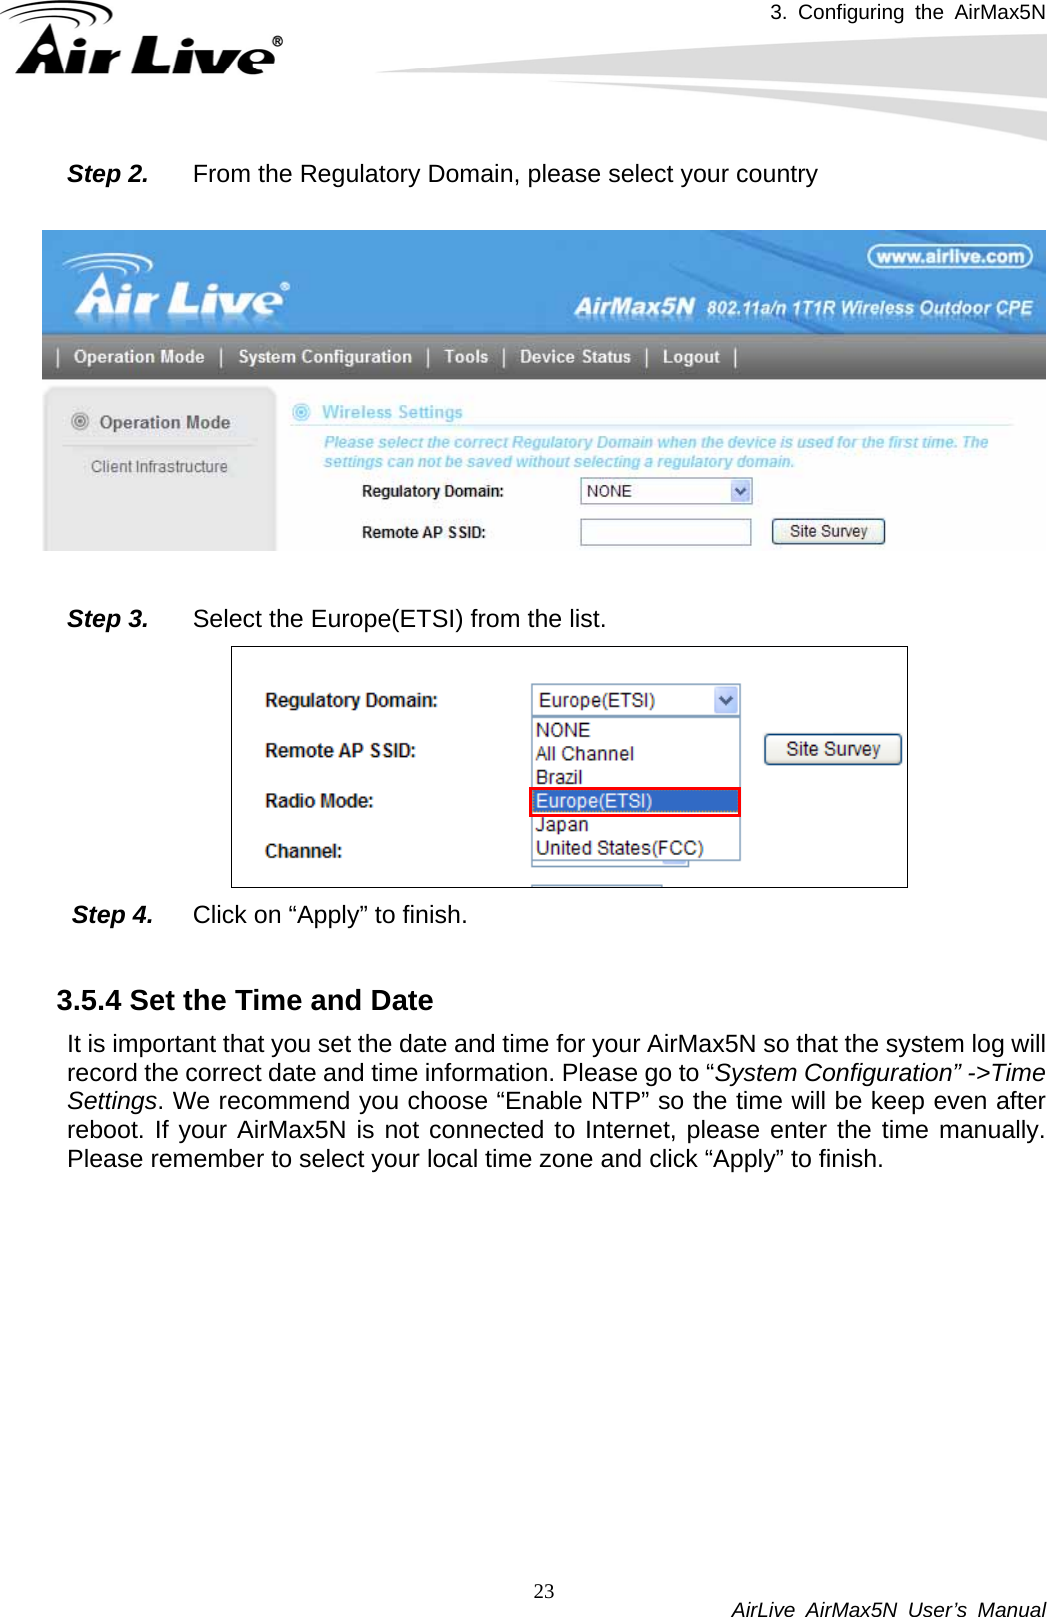 3. Configuring the AirMax5N           AirLive AirMax5N User’s Manual 23Step 2.  From the Regulatory Domain, please select your country    Step 3.  Select the Europe(ETSI) from the list.  Step 4.  Click on “Apply” to finish.  3.5.4 Set the Time and Date   It is important that you set the date and time for your AirMax5N so that the system log will record the correct date and time information. Please go to “System Configuration” -&gt;Time Settings. We recommend you choose “Enable NTP” so the time will be keep even after reboot. If your AirMax5N is not connected to Internet, please enter the time manually. Please remember to select your local time zone and click “Apply” to finish. 